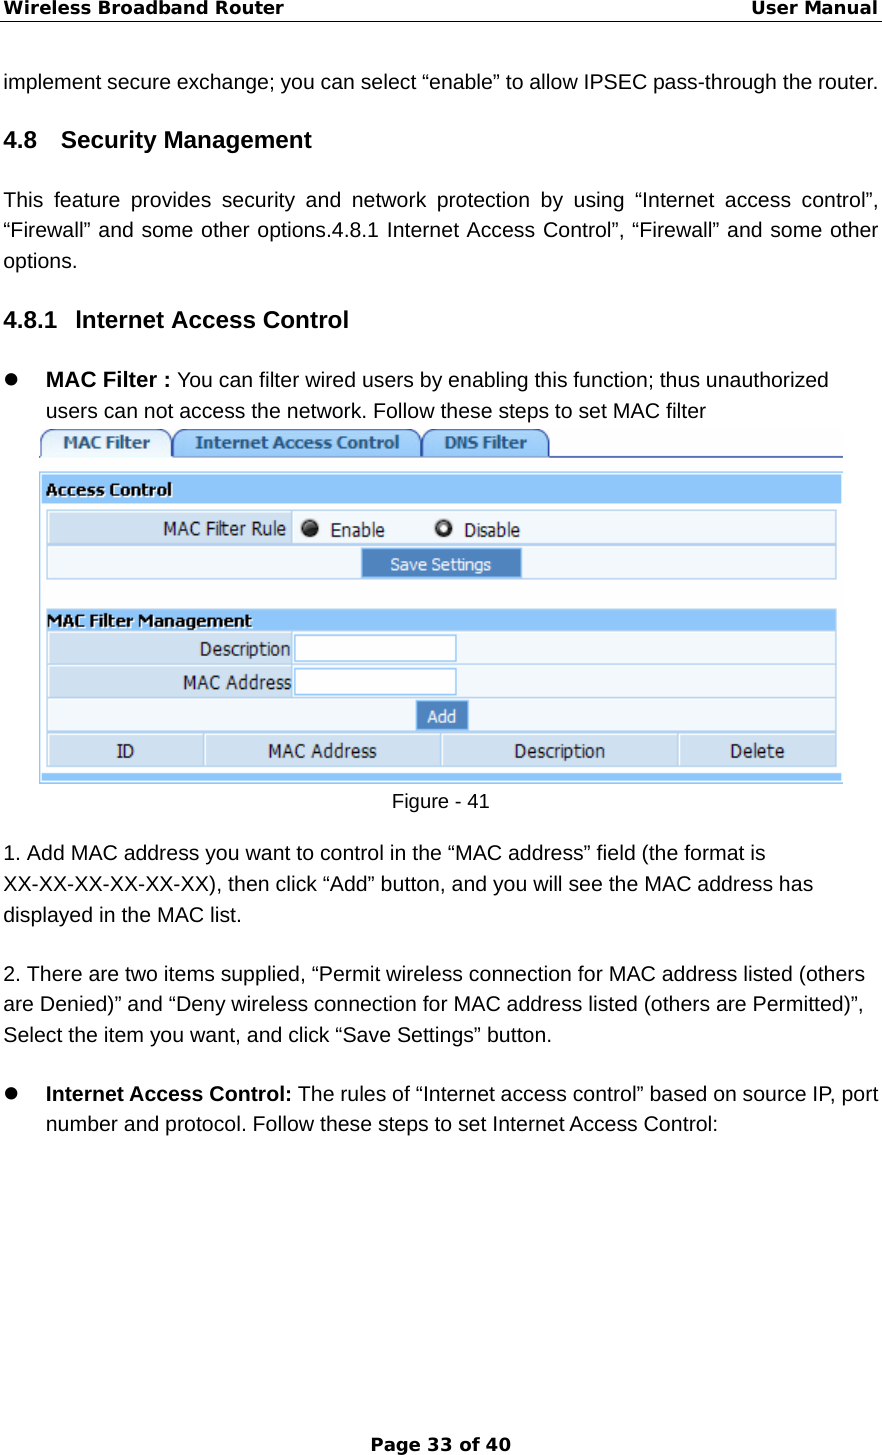 Wireless Broadband Router                                                   User Manual Page 33 of 40 implement secure exchange; you can select “enable” to allow IPSEC pass-through the router. 4.8 Security Management This feature provides security and network protection by using “Internet access control”, “Firewall” and some other options.4.8.1 Internet Access Control”, “Firewall” and some other options. 4.8.1  lnternet Access Control z MAC Filter : You can filter wired users by enabling this function; thus unauthorized users can not access the network. Follow these steps to set MAC filter   Figure - 41 1. Add MAC address you want to control in the “MAC address” field (the format is XX-XX-XX-XX-XX-XX), then click “Add” button, and you will see the MAC address has displayed in the MAC list. 2. There are two items supplied, “Permit wireless connection for MAC address listed (others are Denied)” and “Deny wireless connection for MAC address listed (others are Permitted)”, Select the item you want, and click “Save Settings” button.   z Internet Access Control: The rules of “Internet access control” based on source IP, port number and protocol. Follow these steps to set Internet Access Control: 